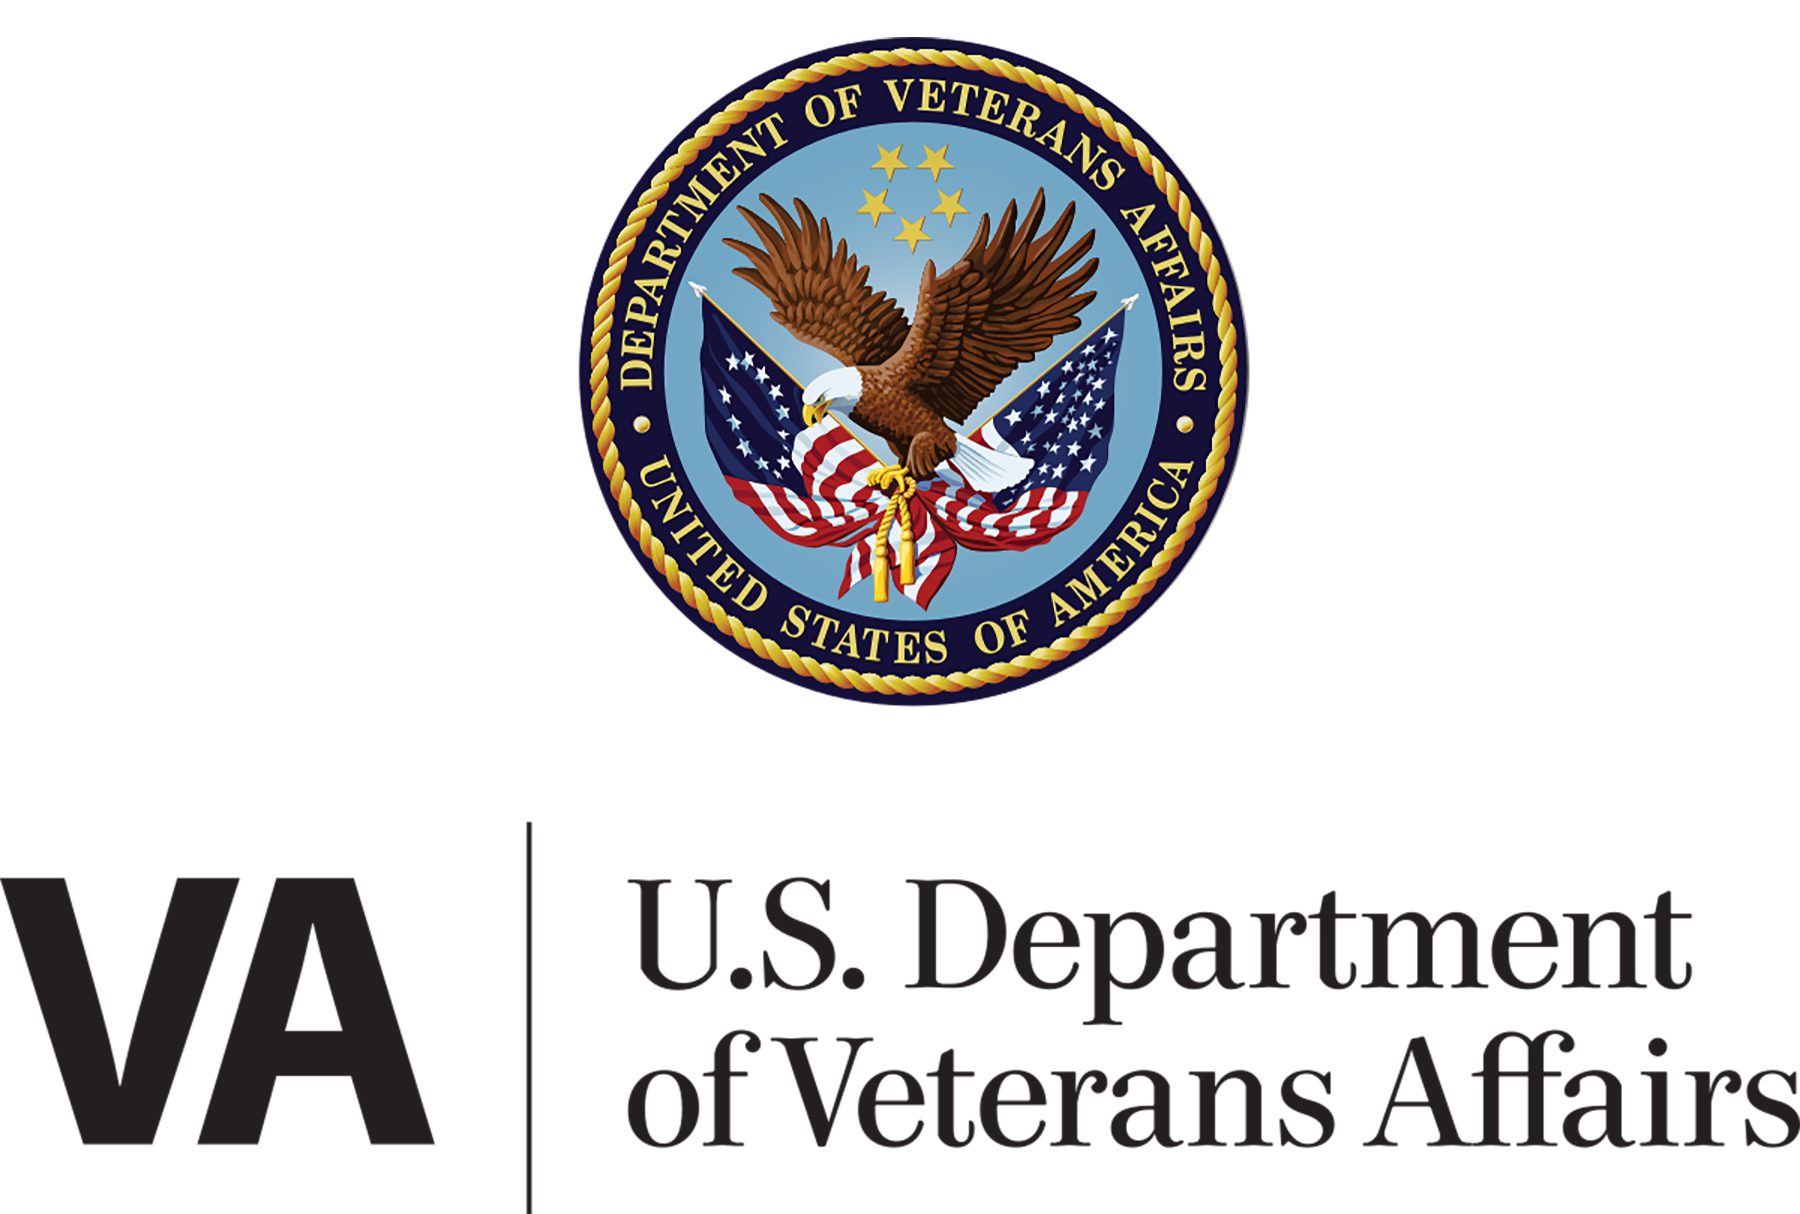 VA's Troubled EHR System: Cautiously Moving Forward Despite Past Woes